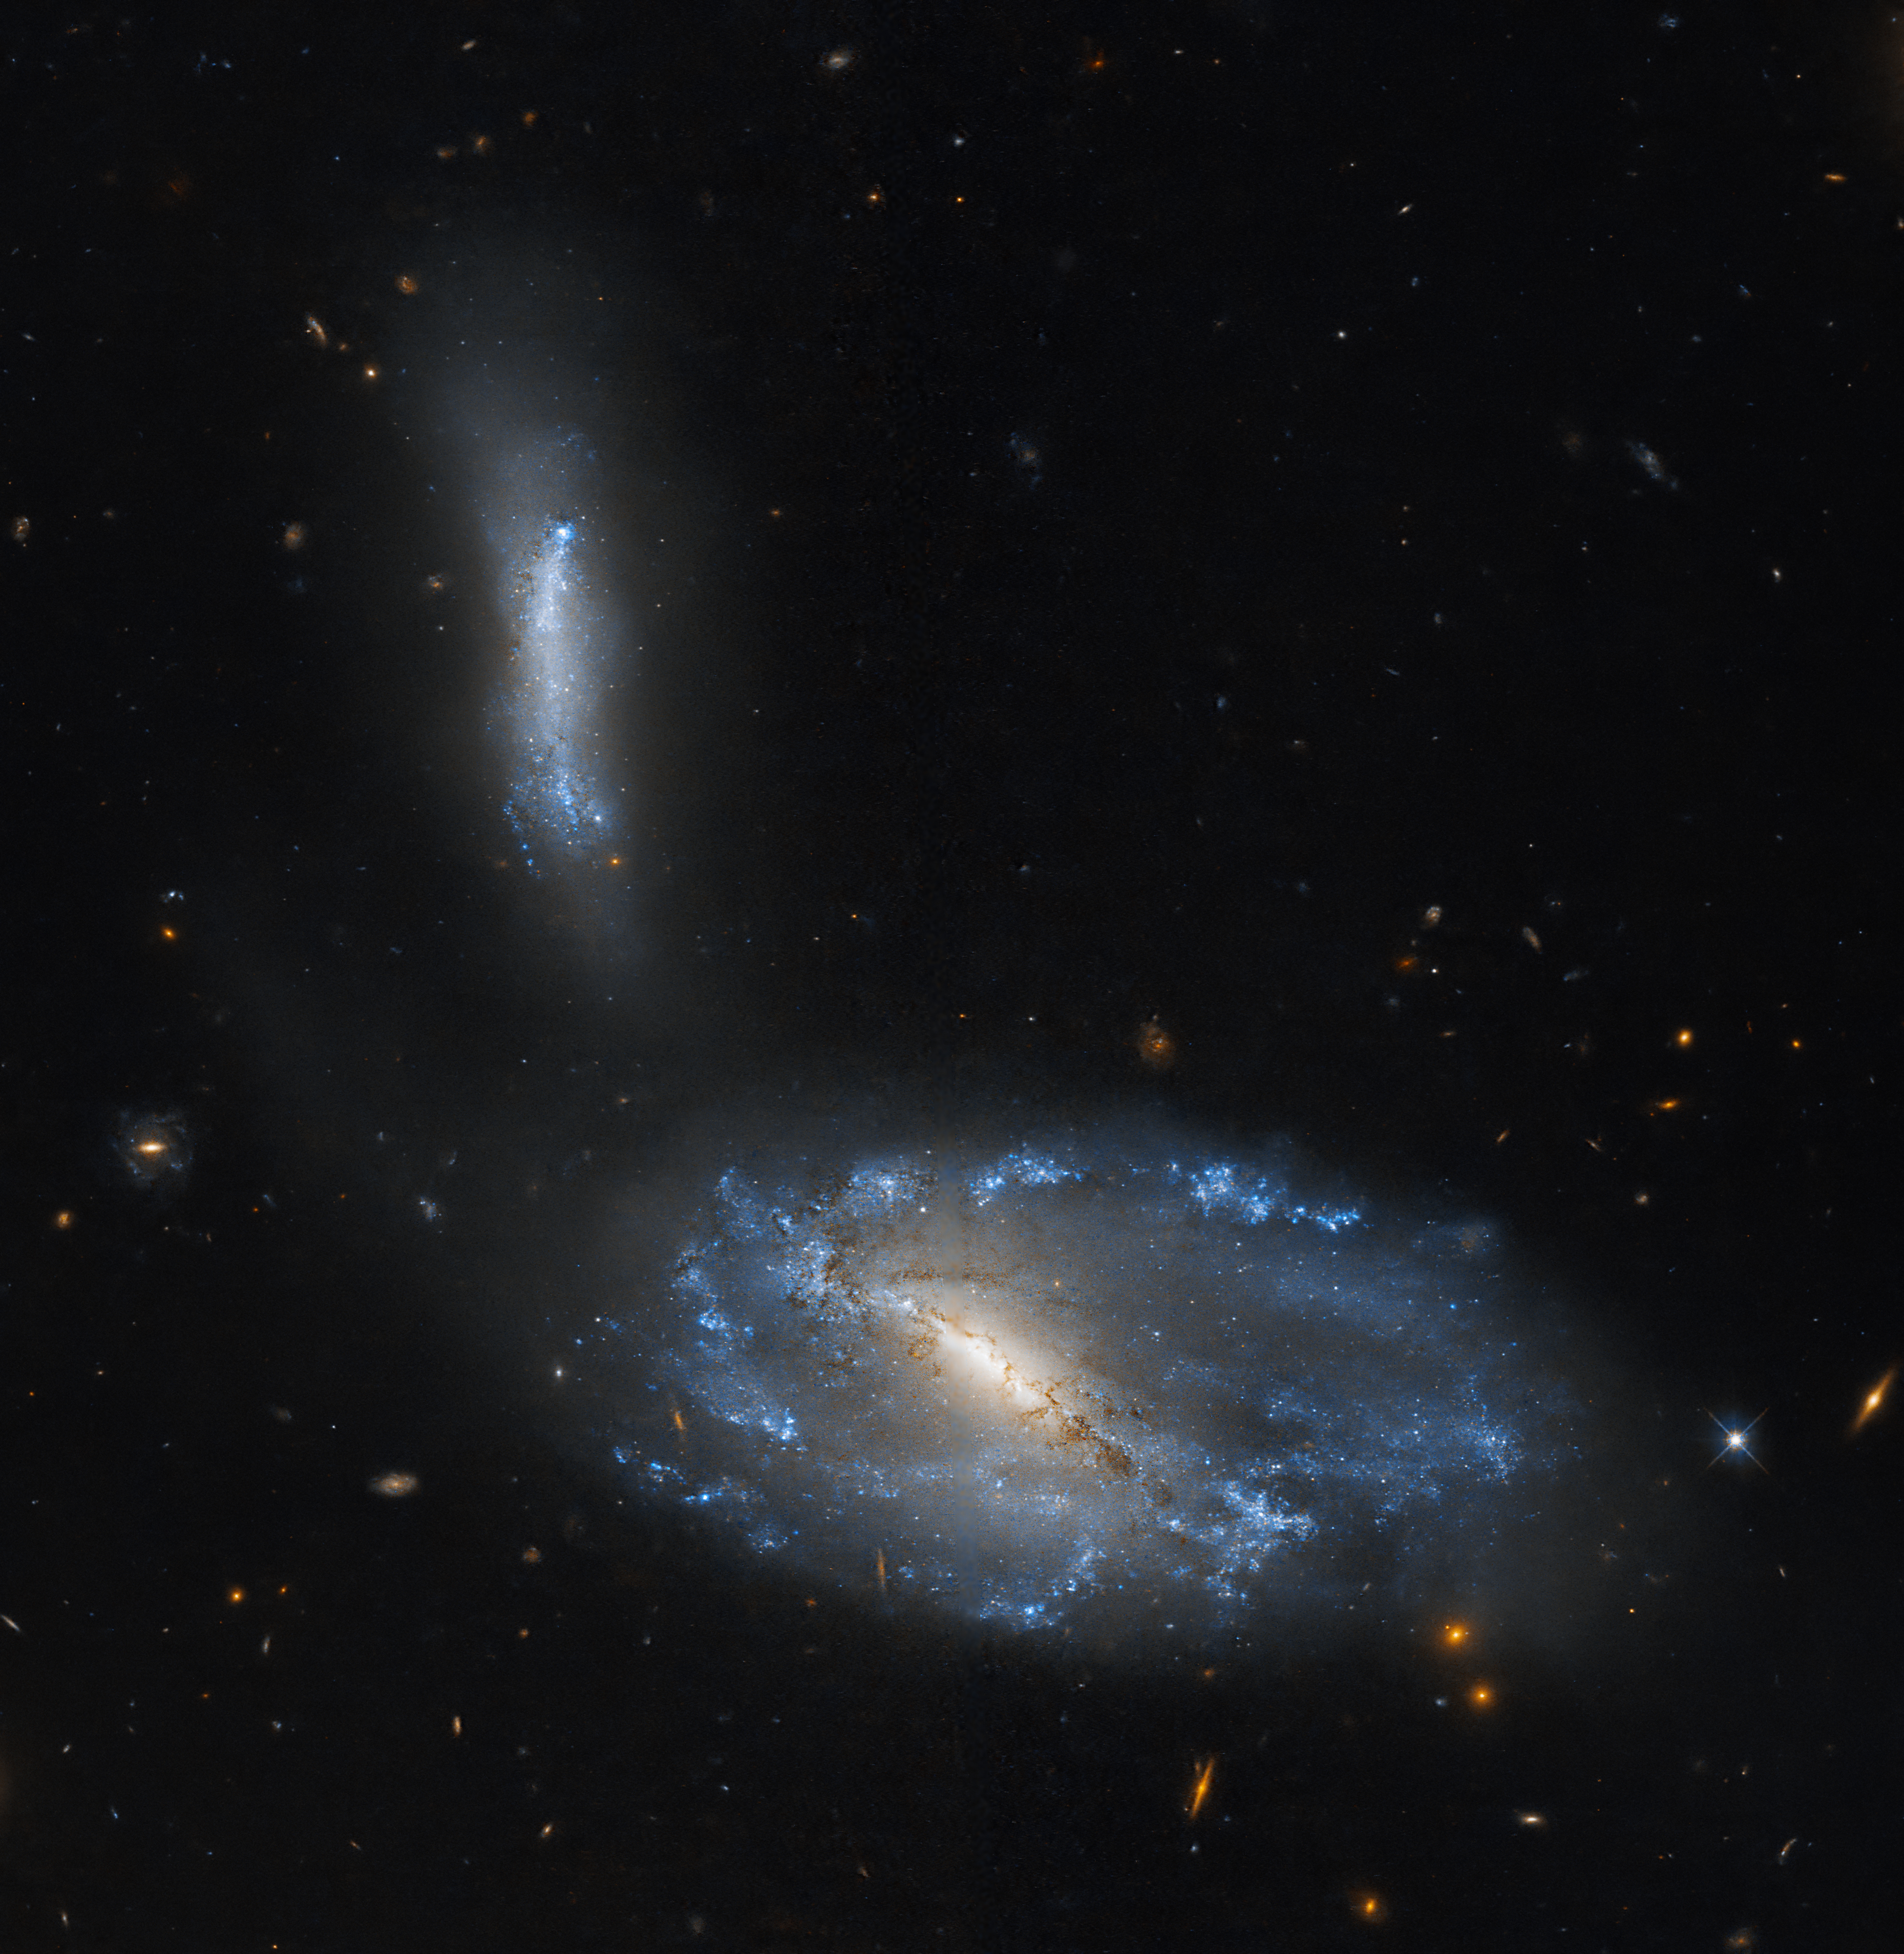 The lower half of the image is filled with a large spiral galaxy that has a bright white bar of stars at its center. To its upper left, a smaller galaxy shines with bright blue stars. It has an irregular shape, appearing almost like a vertical bar of stars. The rest of the image shows black space interspersed with more distant galaxies and stars.